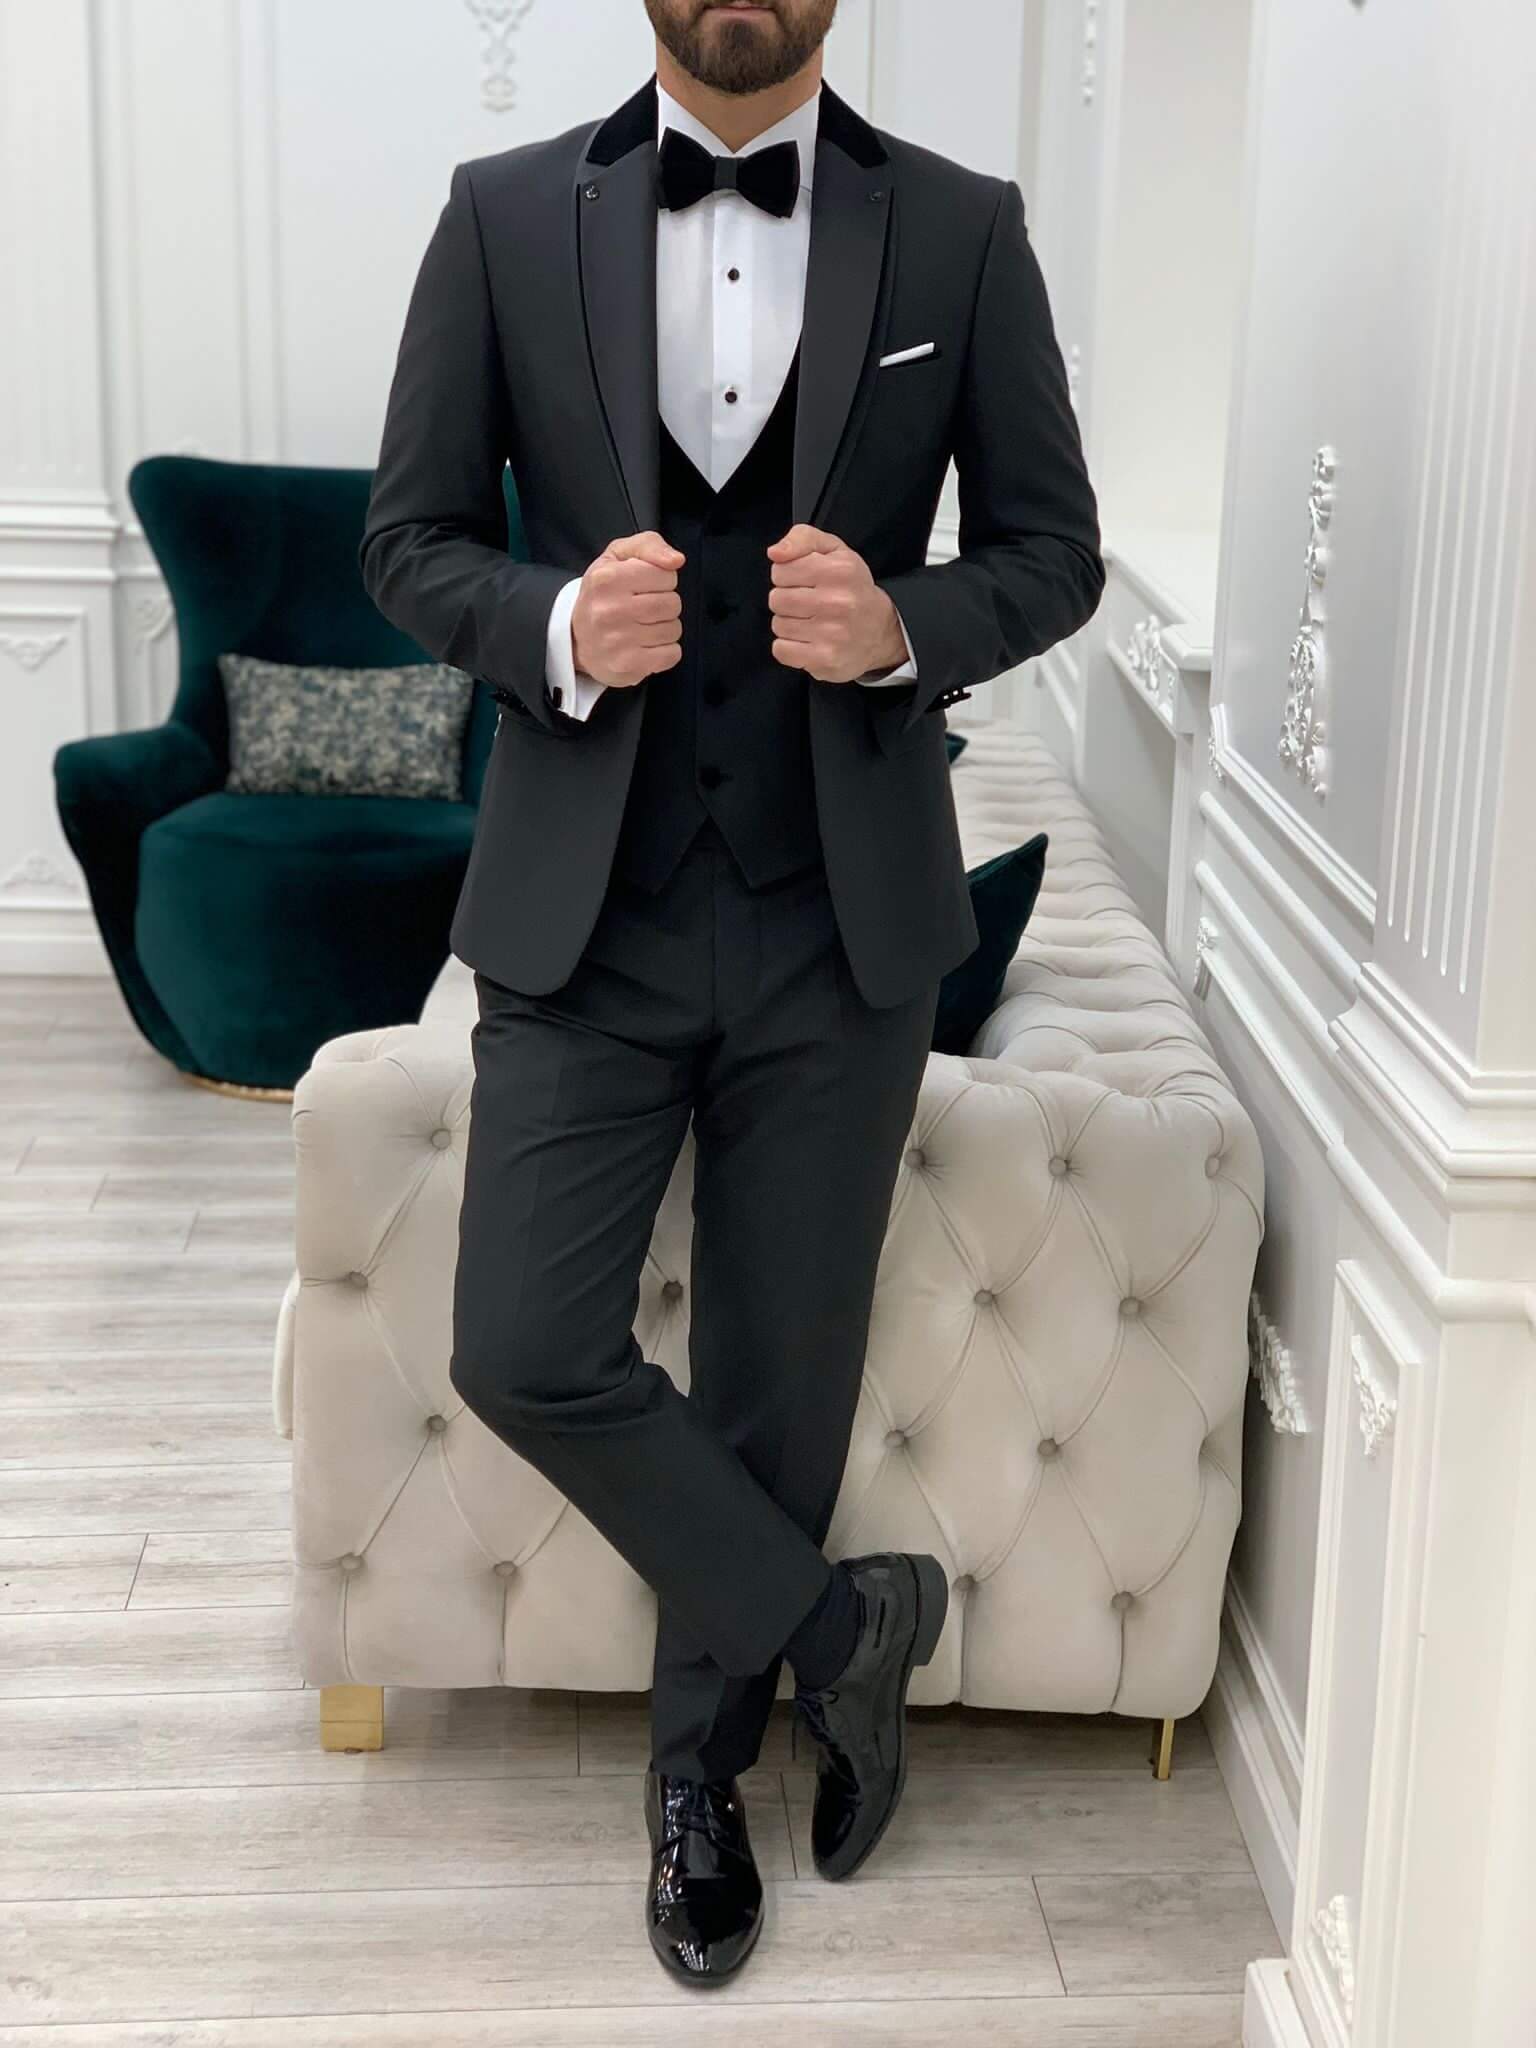 Model Wearing Black Tuxedo with Unique Shawl Lapel, Single Button, Double Slit, Slim-Fit Italian Cut at Formal Event